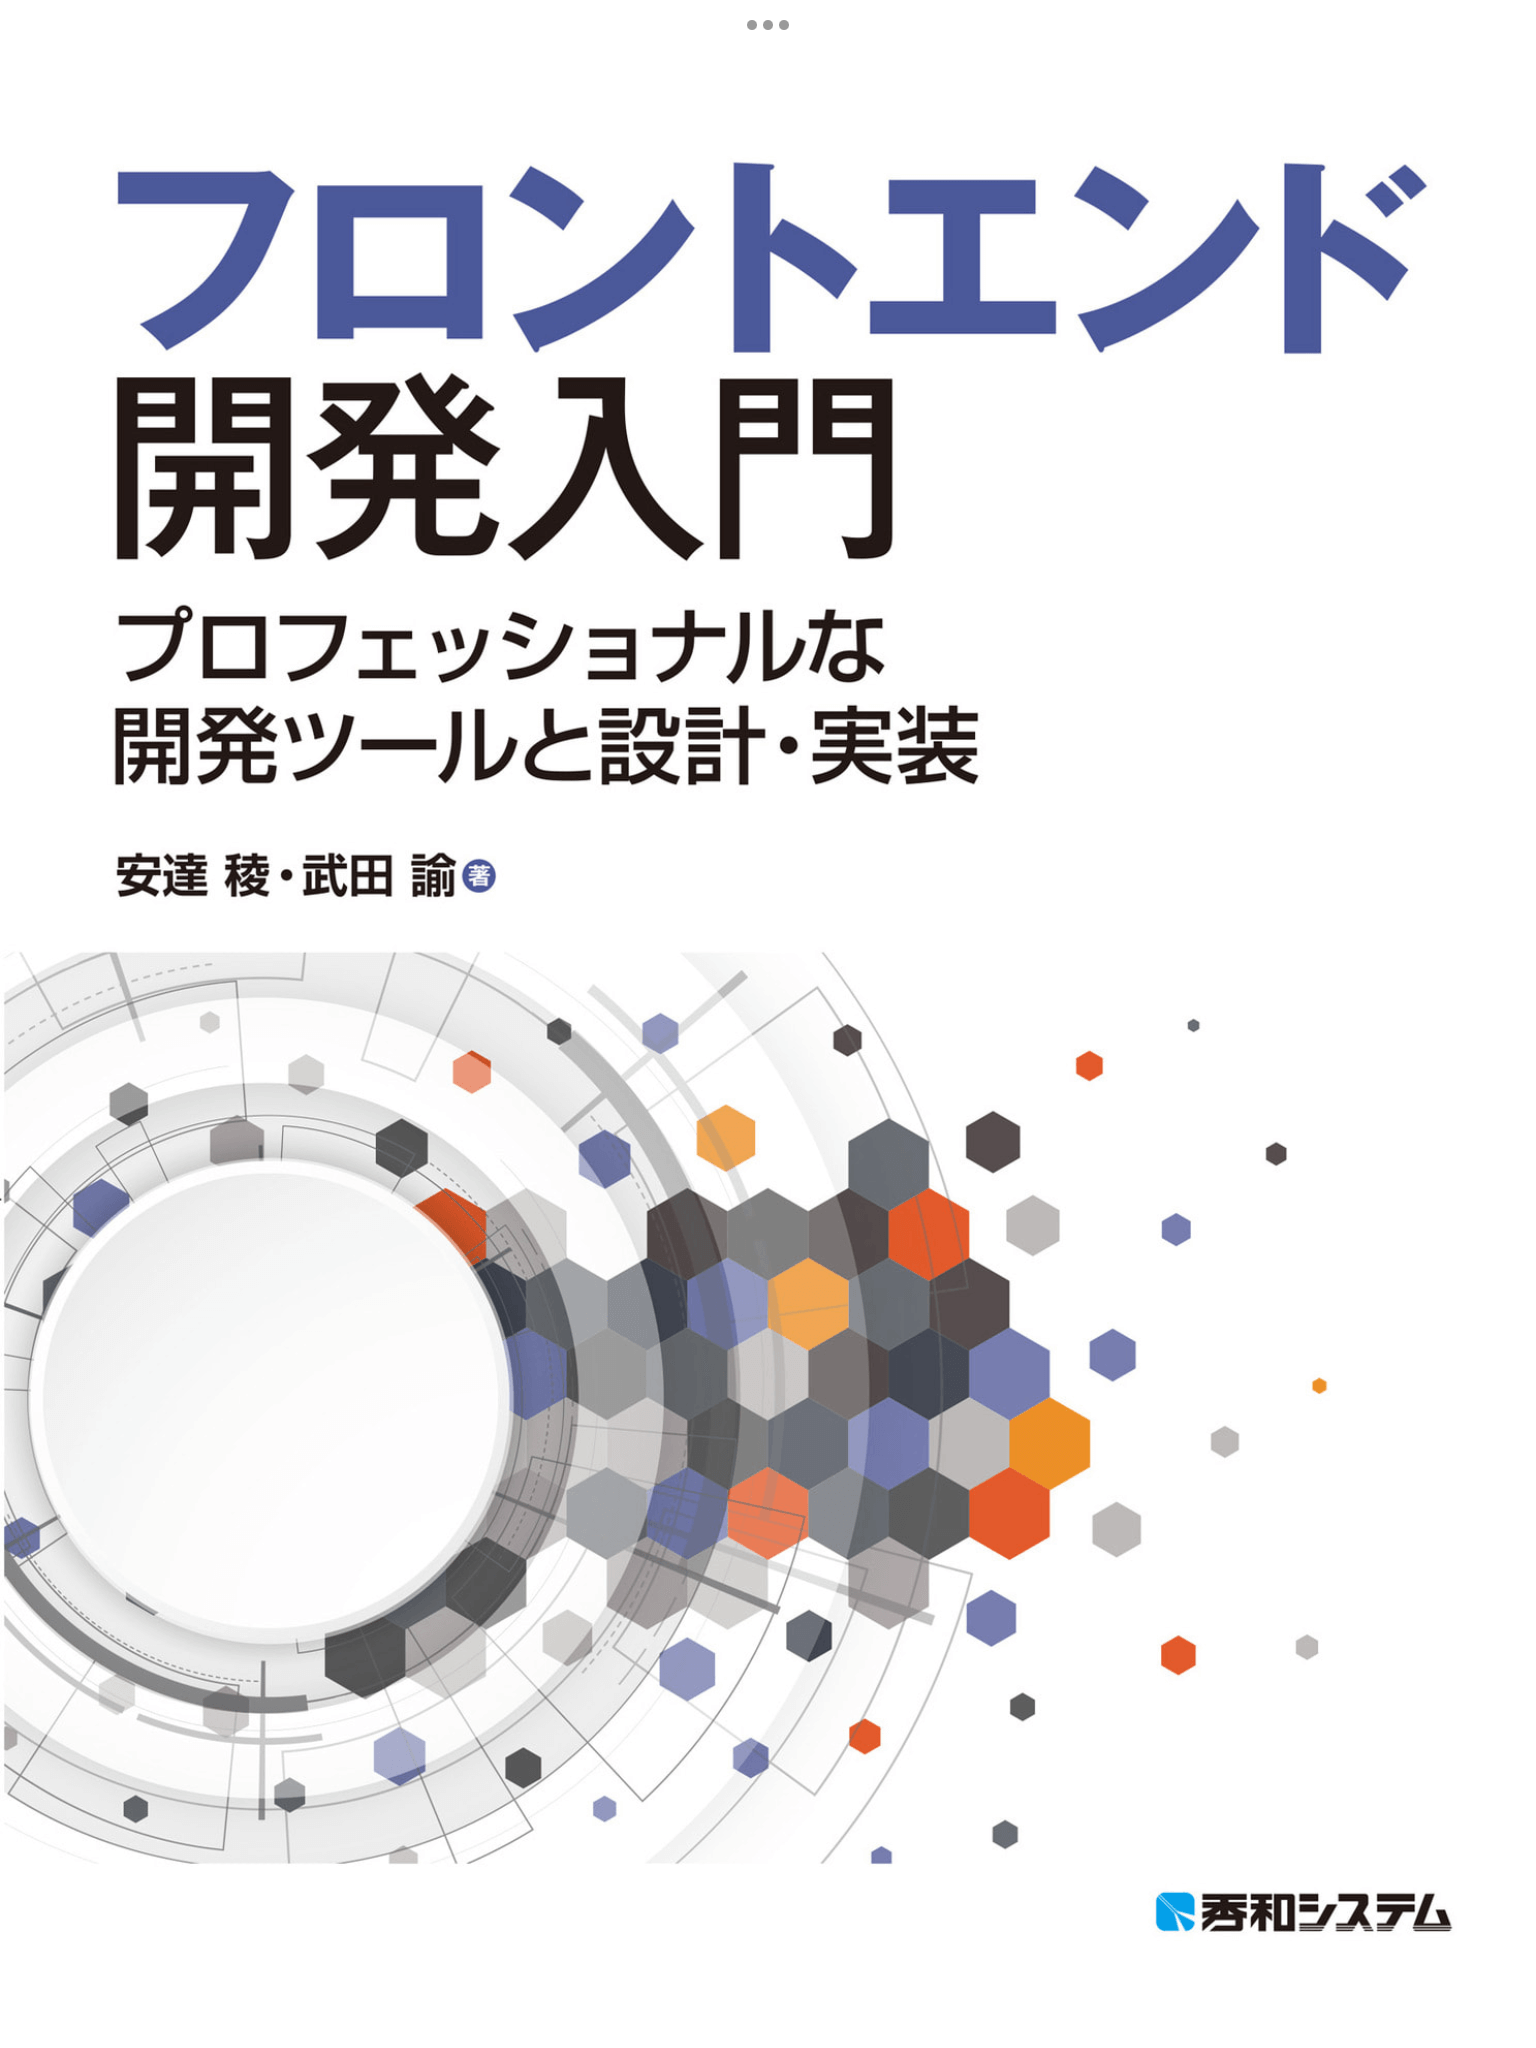 Cover image of the book "Introduction to front-end development Professional development tools and design and implementation (/)"